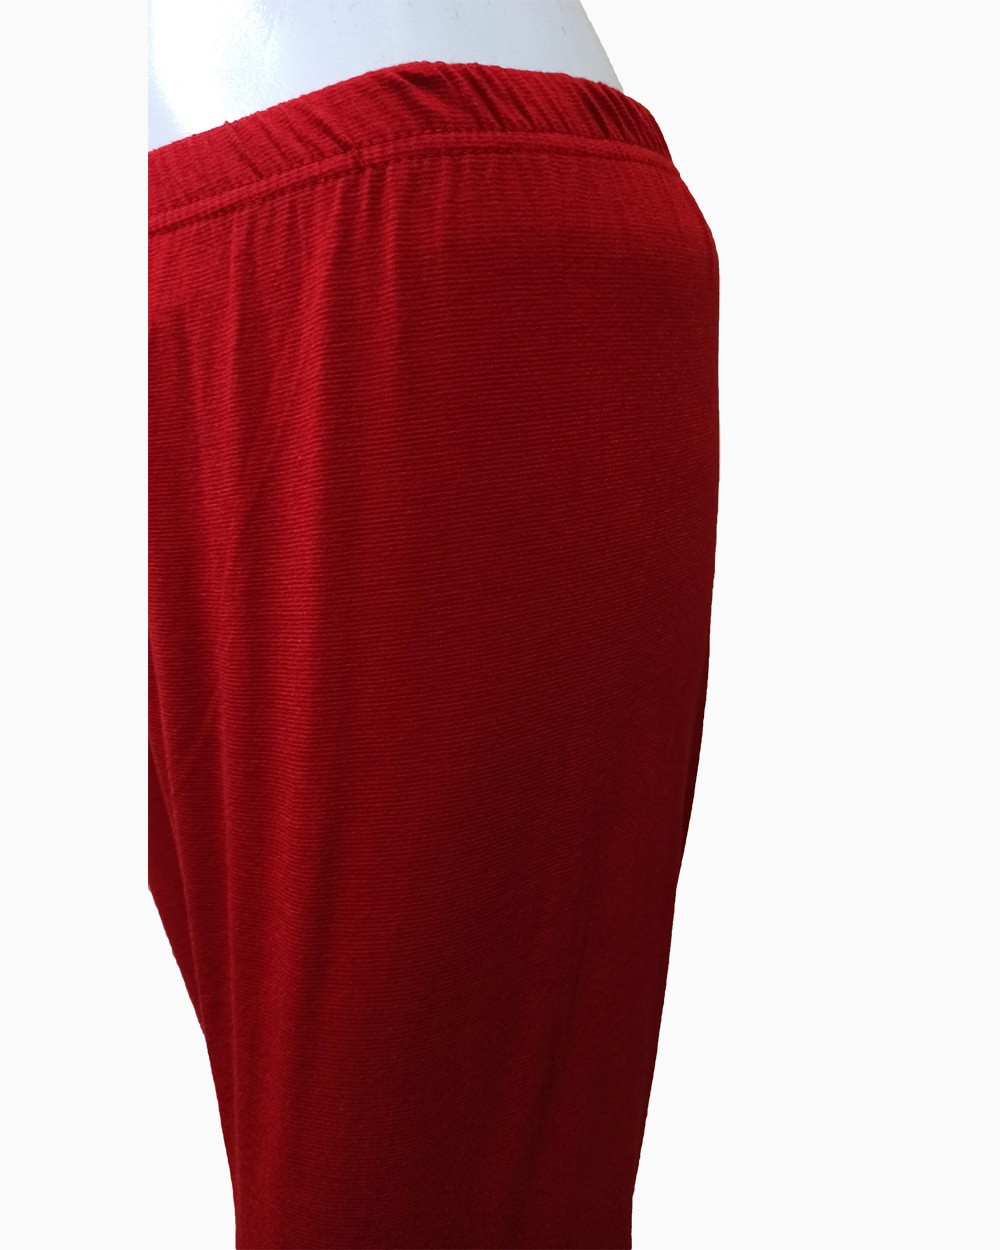 red tights online in pakistan